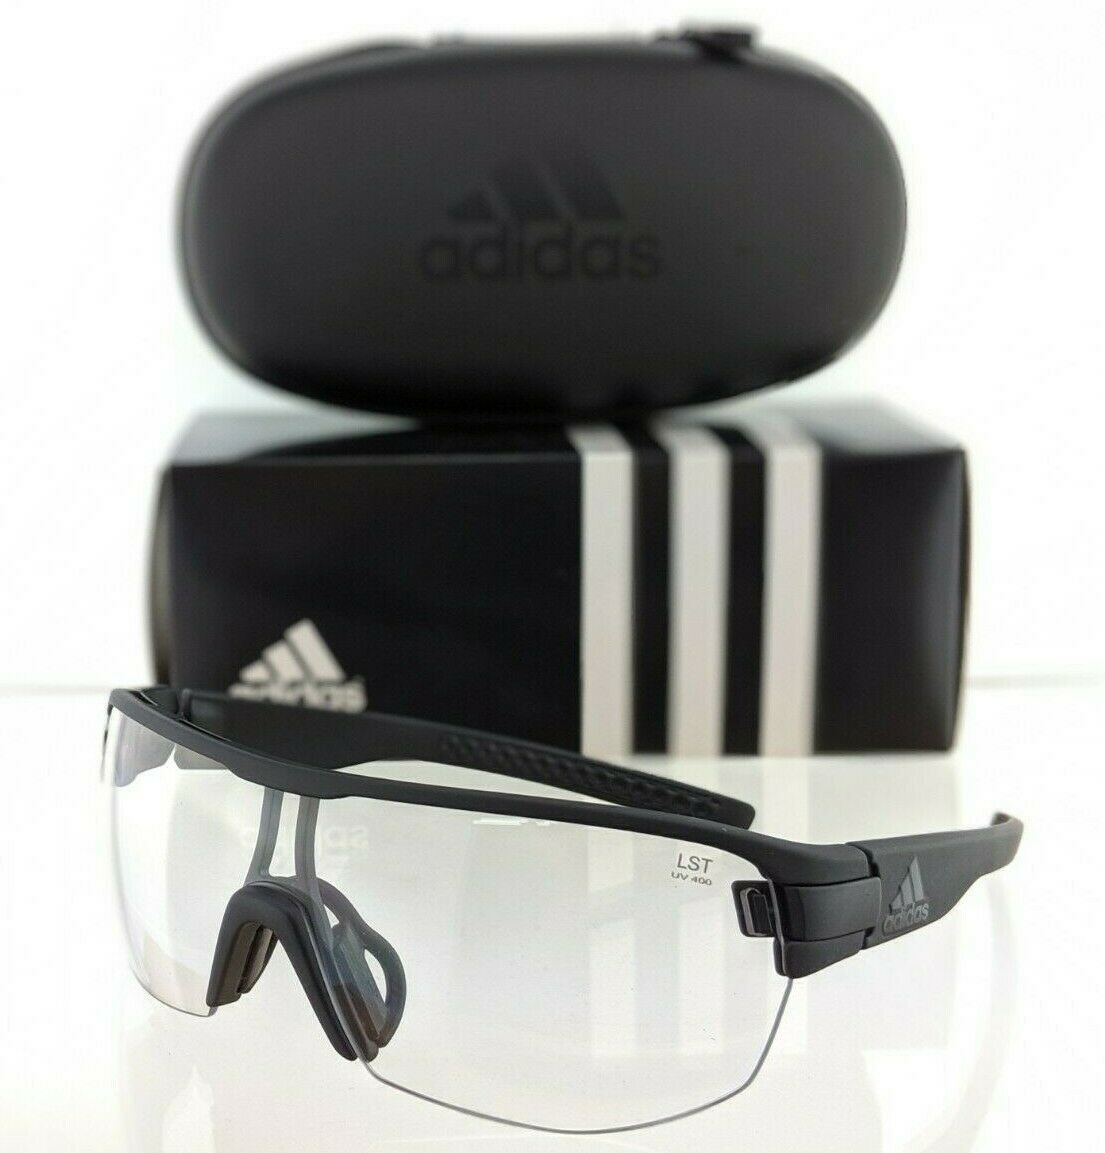 Brand New Authentic Adidas Sunglasses AD 12 and 32 similar items